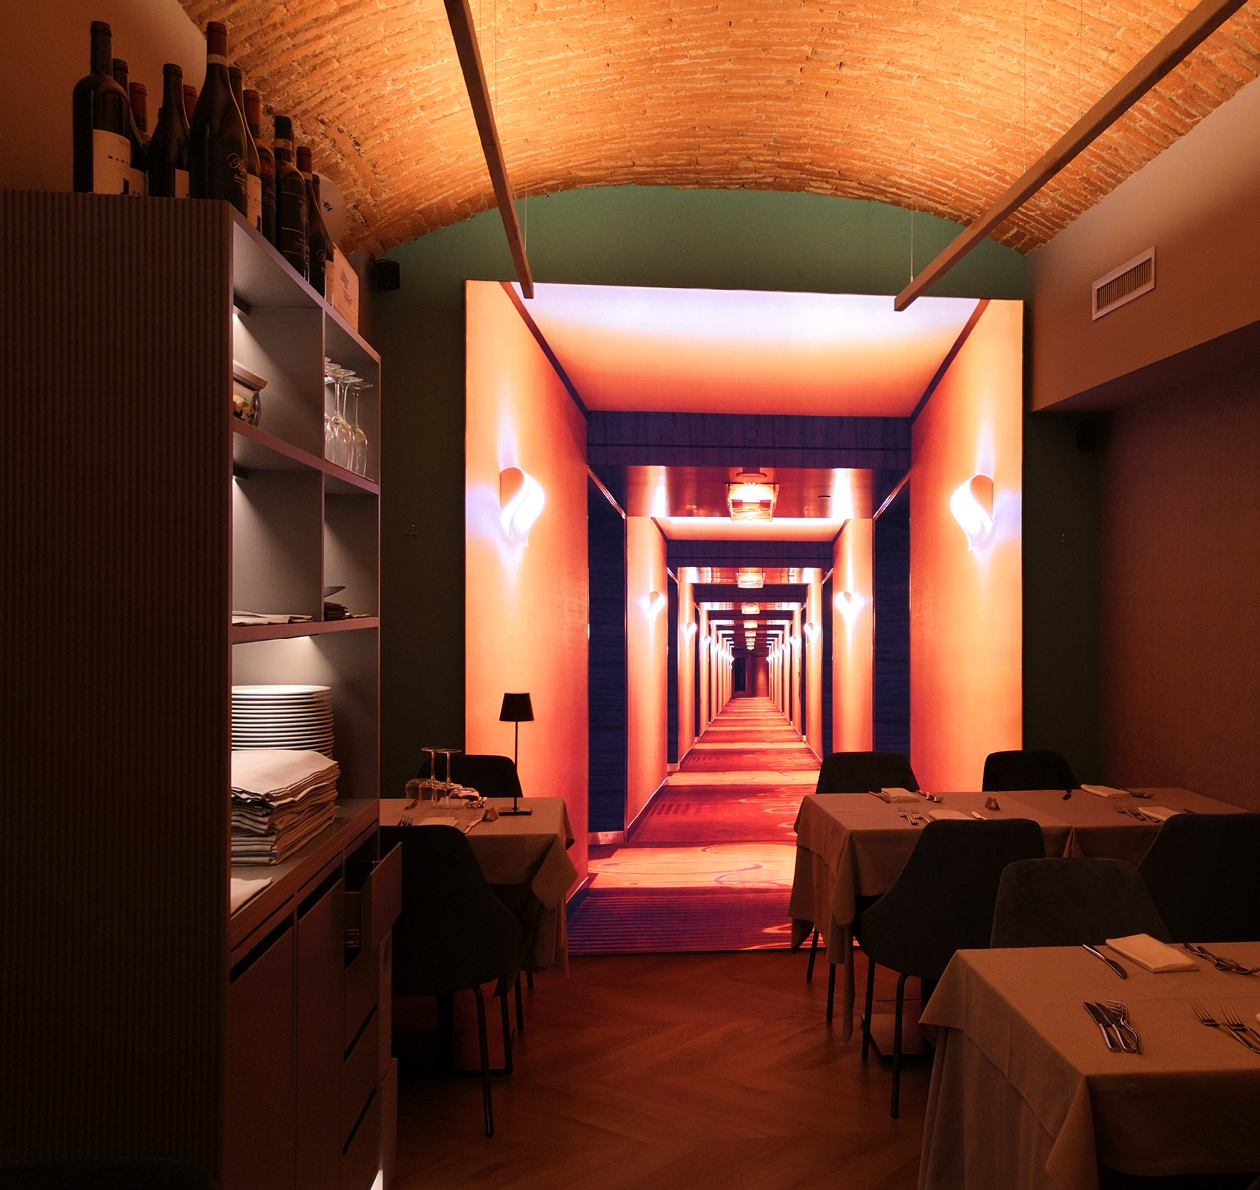 Touchwindow - Blu Food, an immersive gastronomic experience in the center of Milan